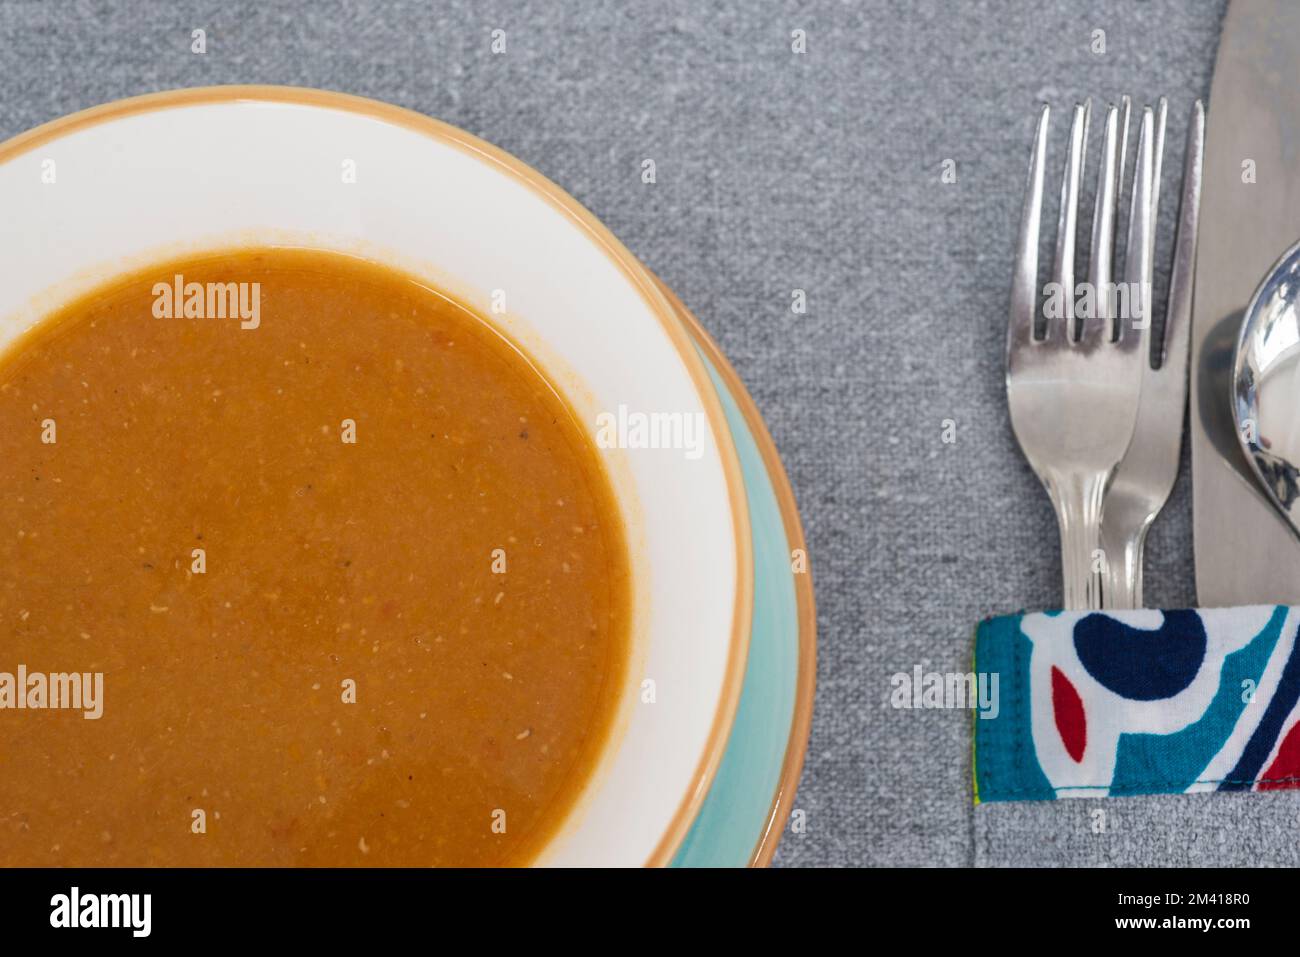 Closeup of lentil soup a la carte appetiser starter meal in bowl with cutlery at restaurant table setting Stock Photo